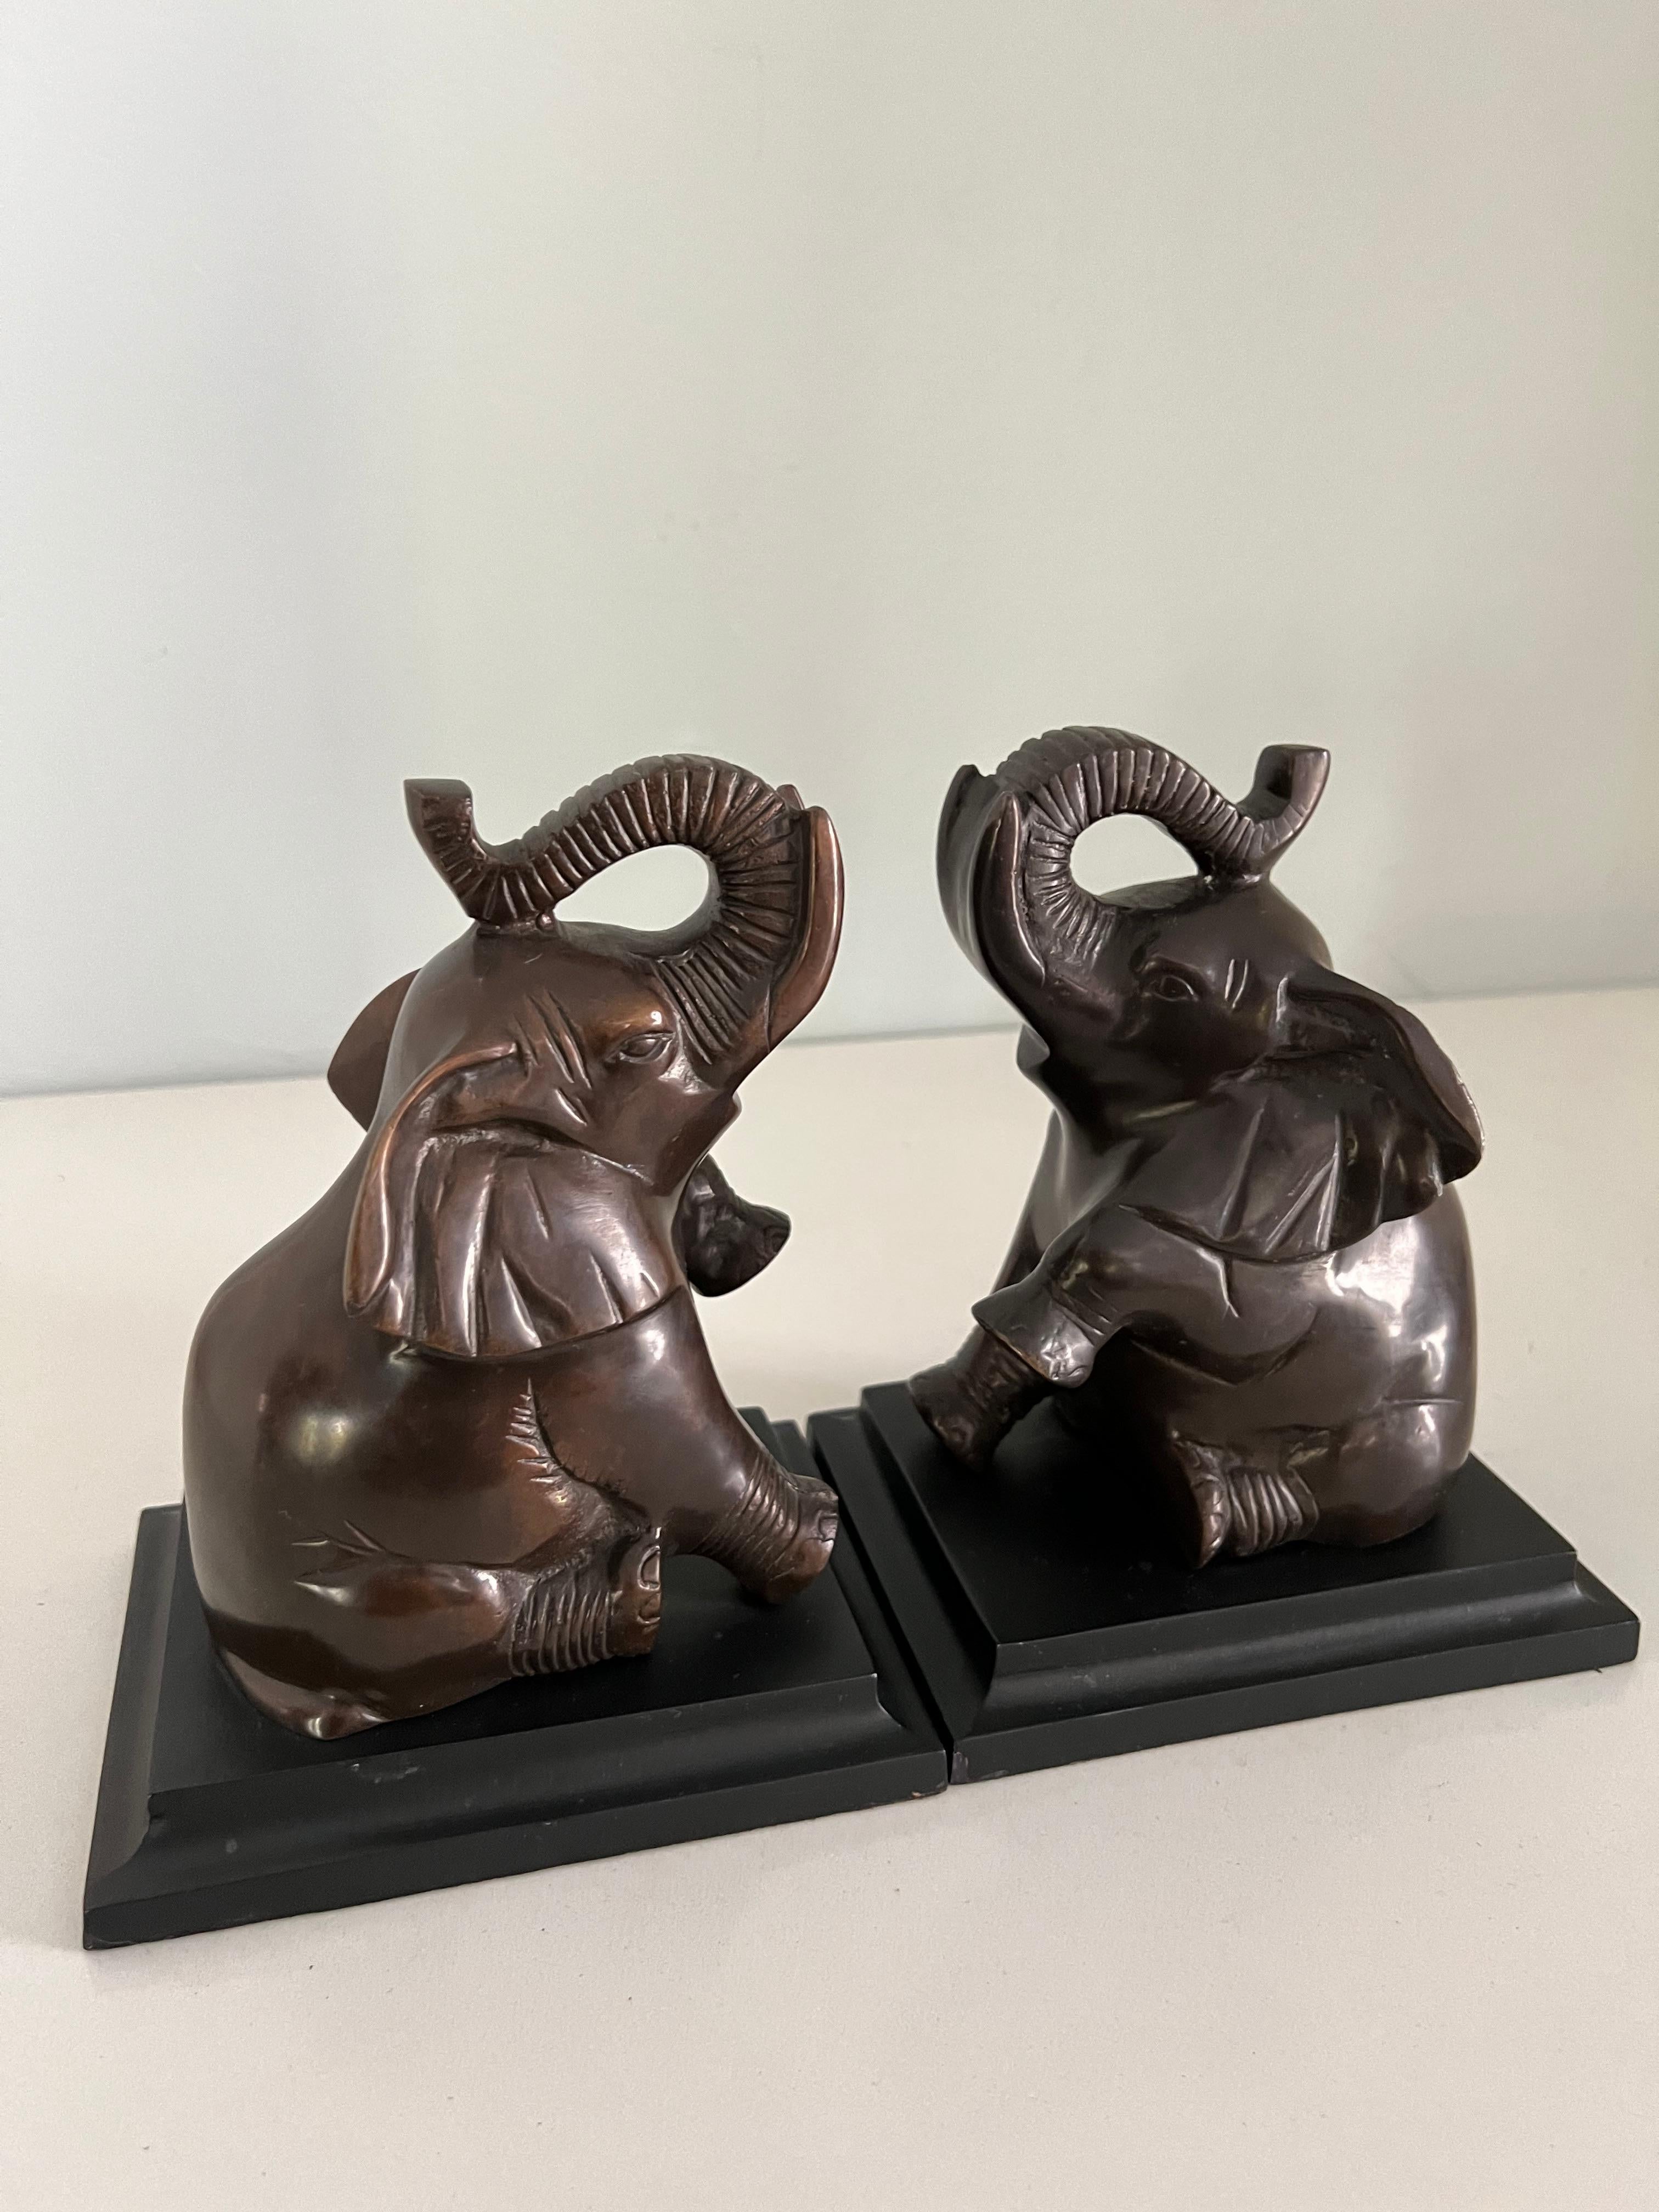 Pair of elephant bookends with felted bottom. A complement to any bookshelf, particularly nice in a children's bedroom. 

